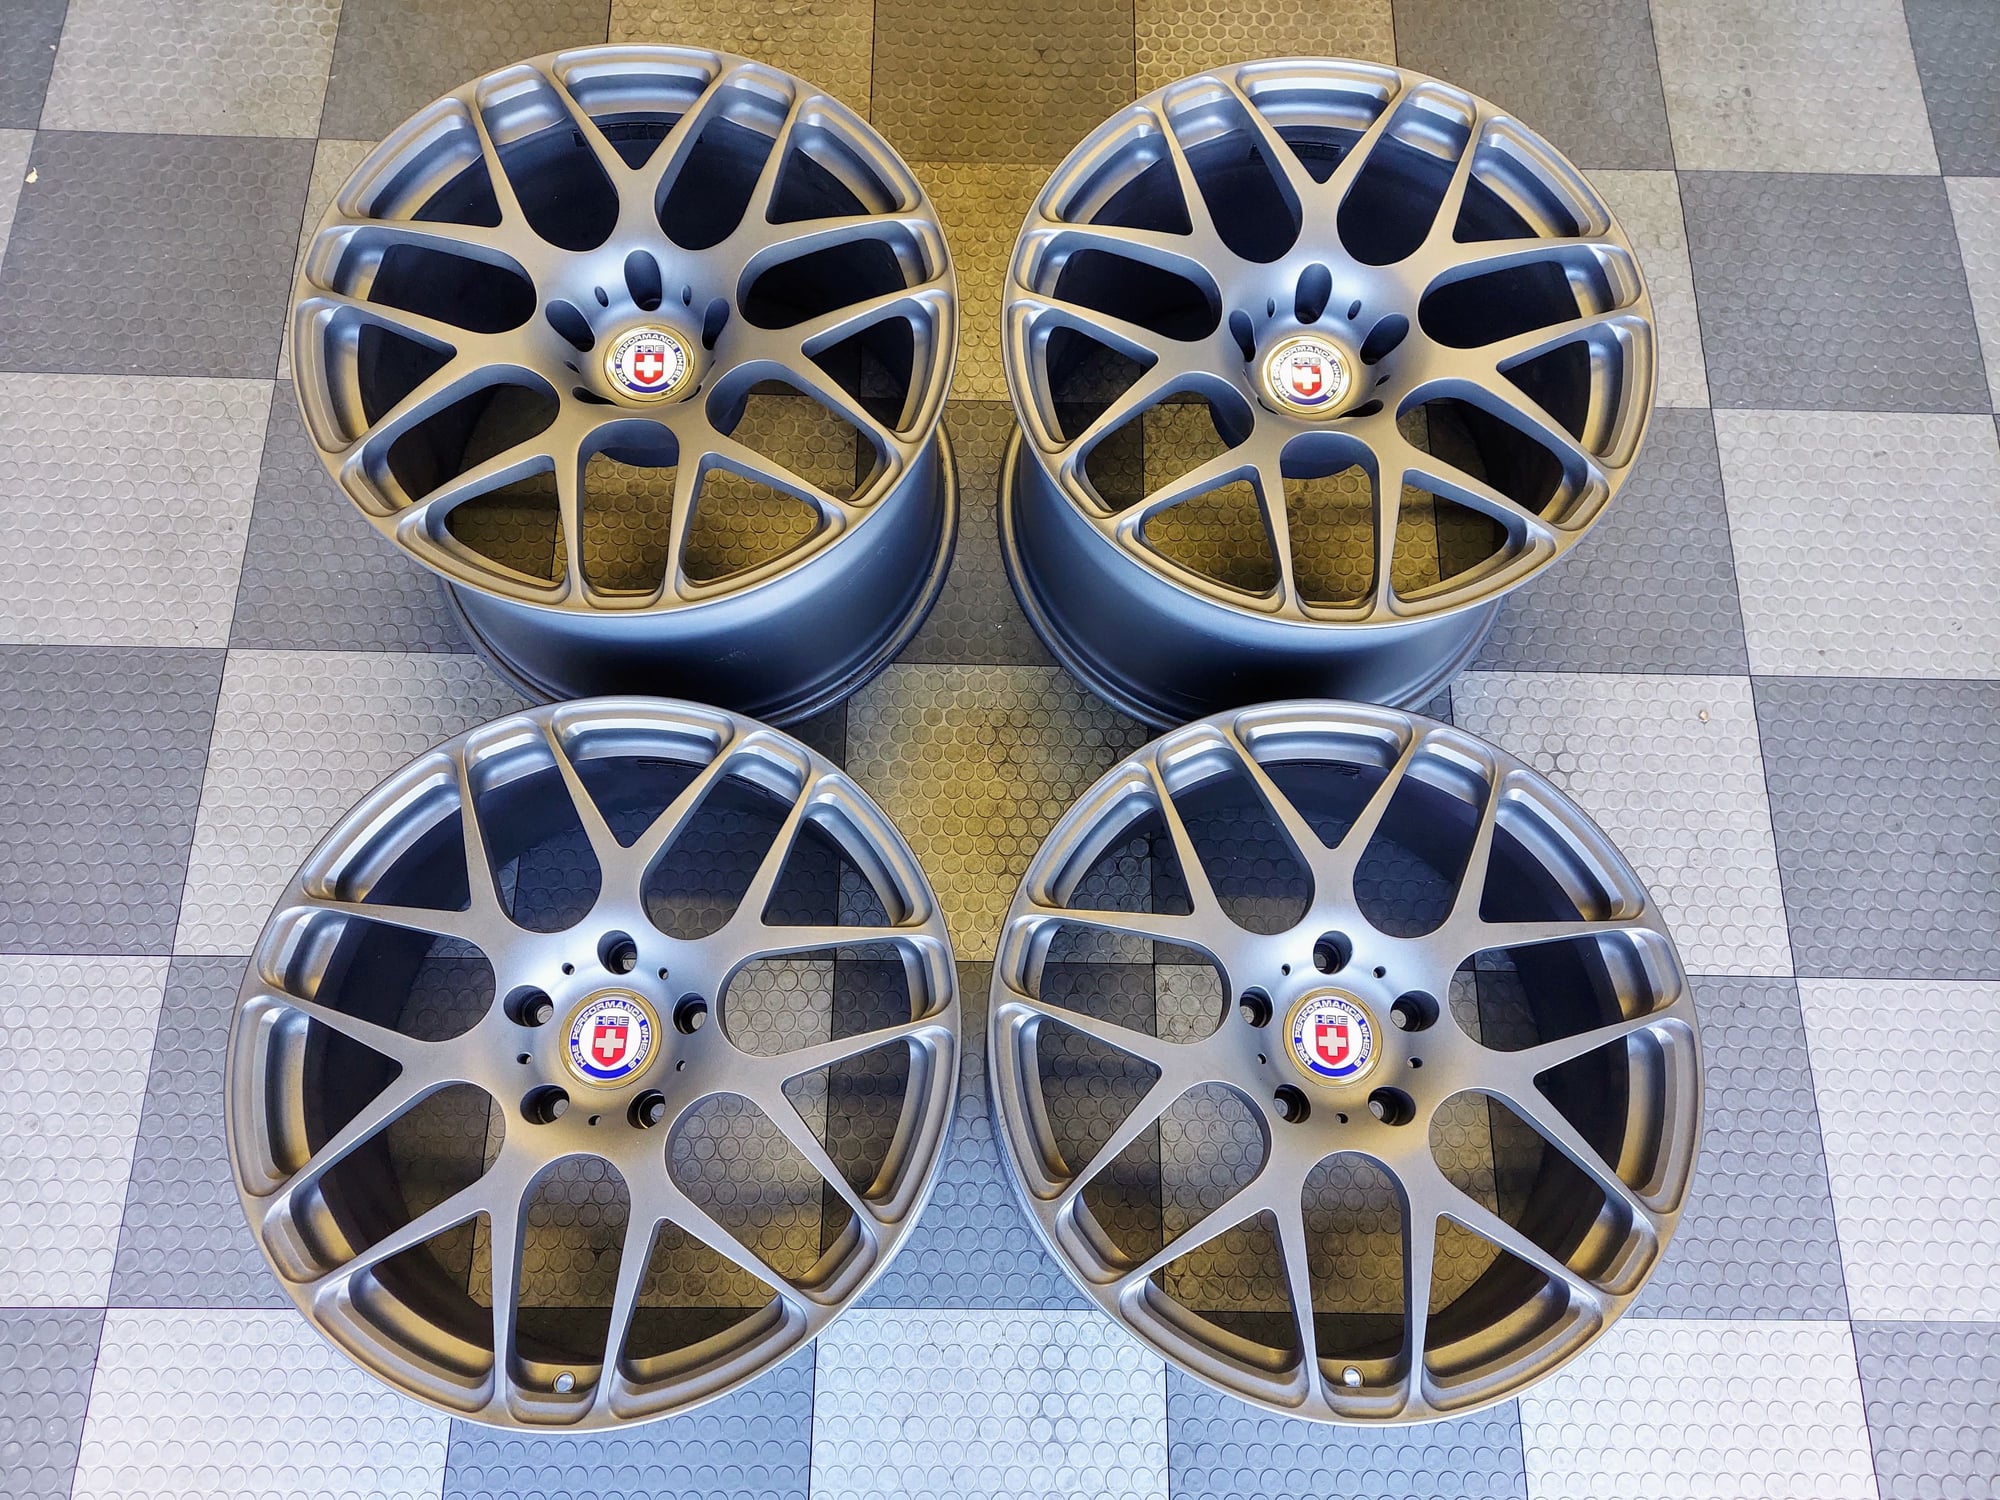 Wheels and Tires/Axles - HRE Profile P40 Series Forged Monoblok 20" Wheels - Used - Medina, OH 44256, United States